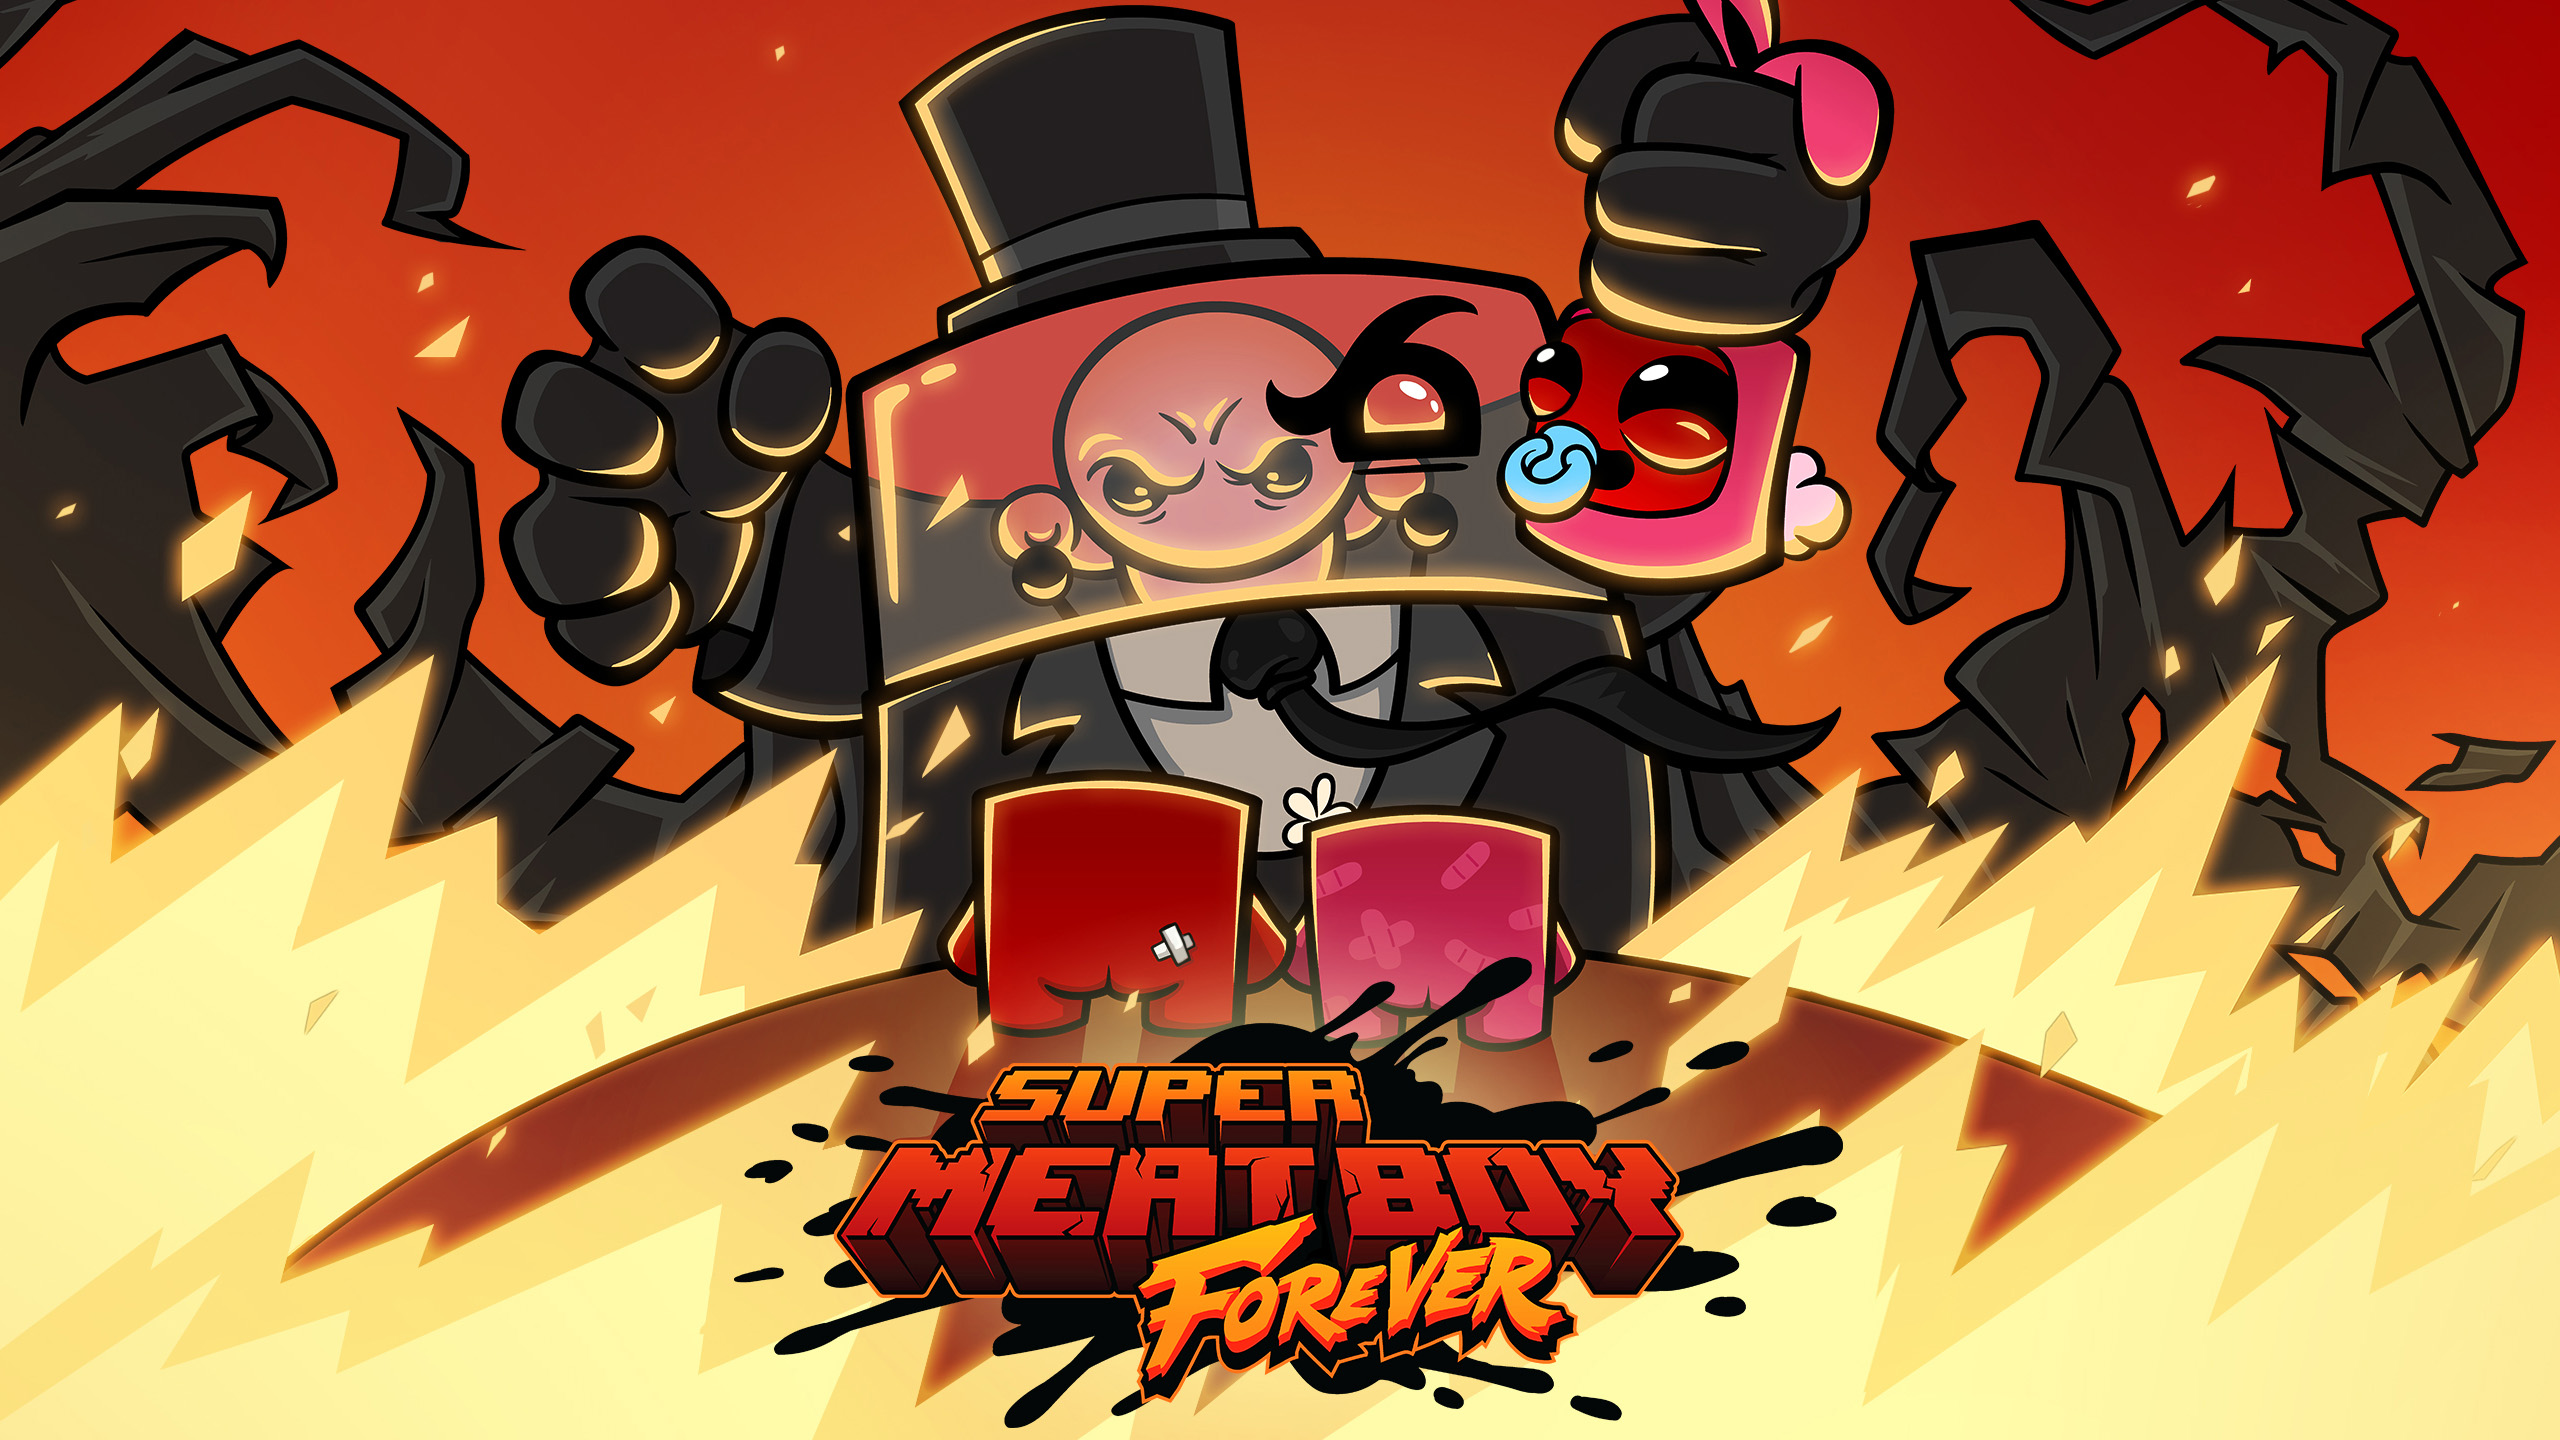 This week’s free Epic Games Store title will now be Super Meat Boy Forever